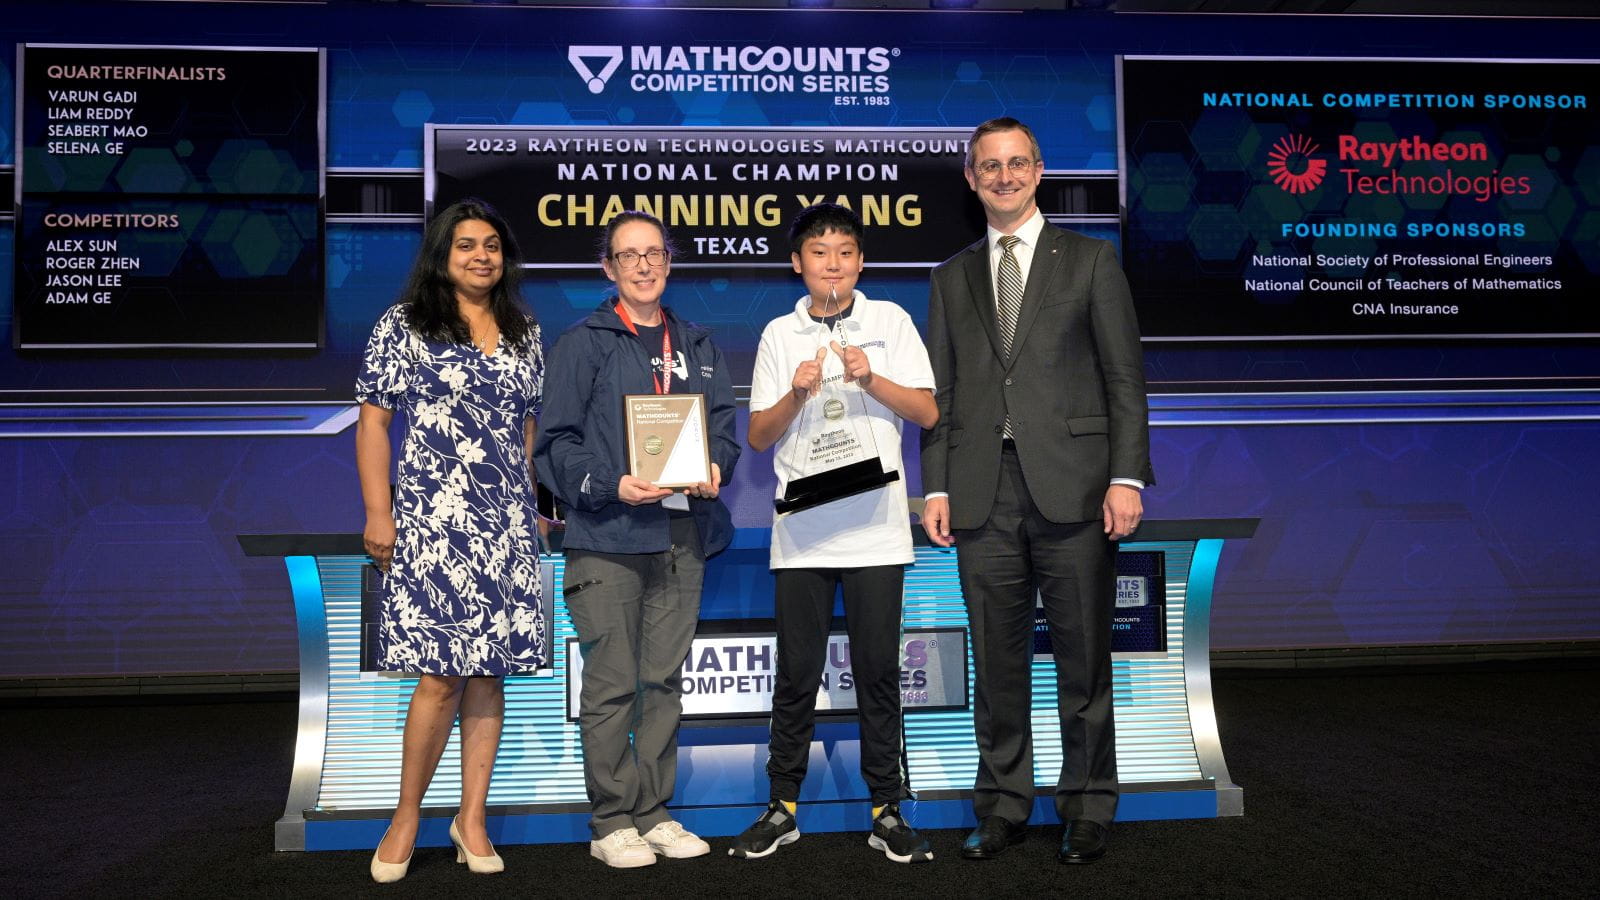 Channing Yang is presented with the 2023 Raytheon Technologies National Champion award by Bindu Nair, the director of basic research at the Office of the Under Secretary of Defense, his coach Andrea Smith, and Tracey Gray, MATHCOUNTS board chair and vice president of Communications and External Affairs for Raytheon Intelligence & Space.